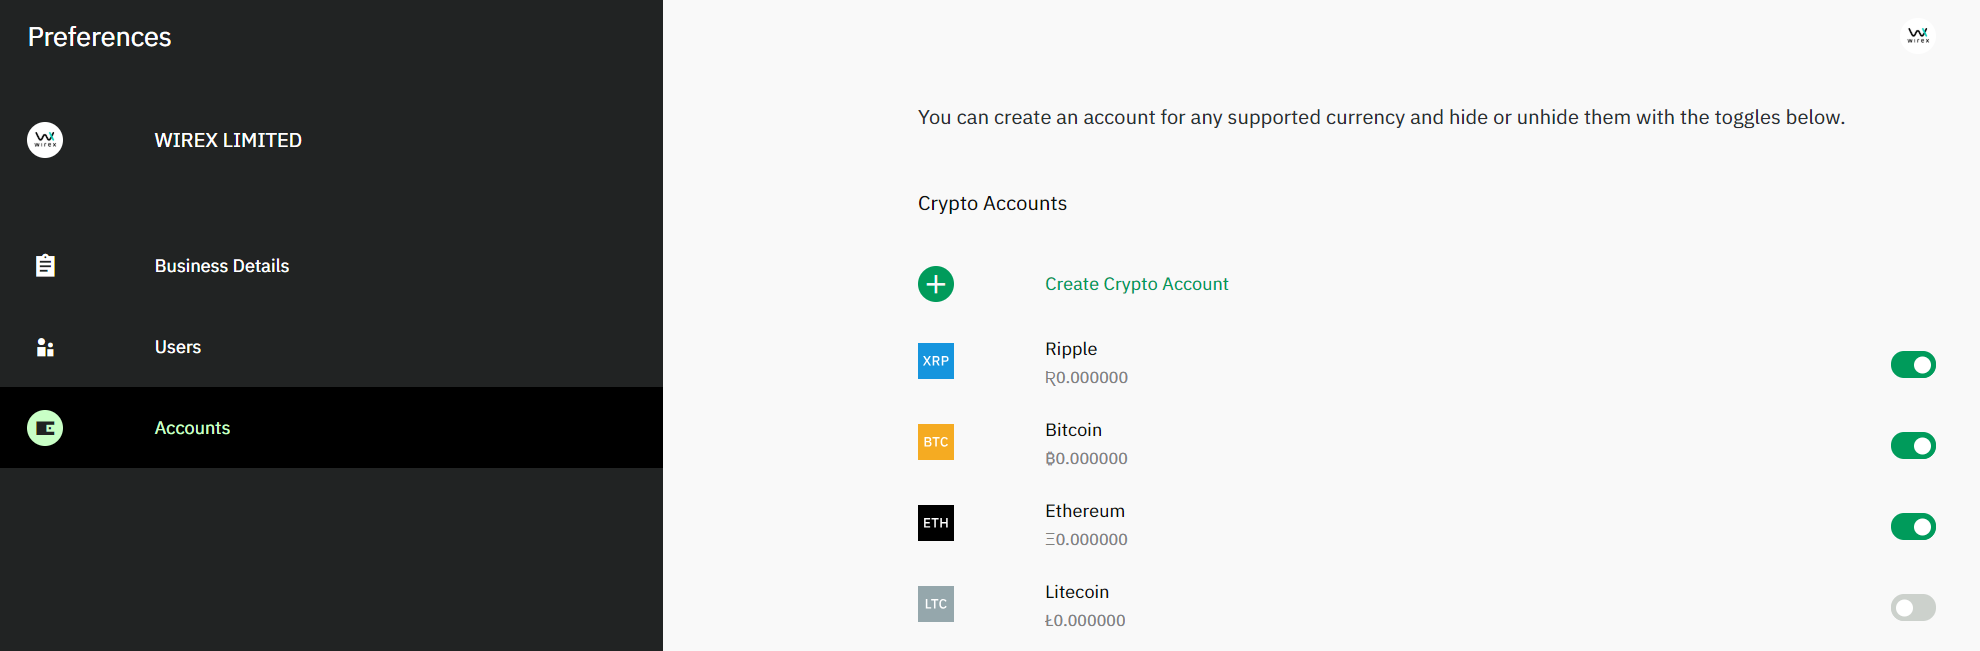 how can i get a bitcoin account